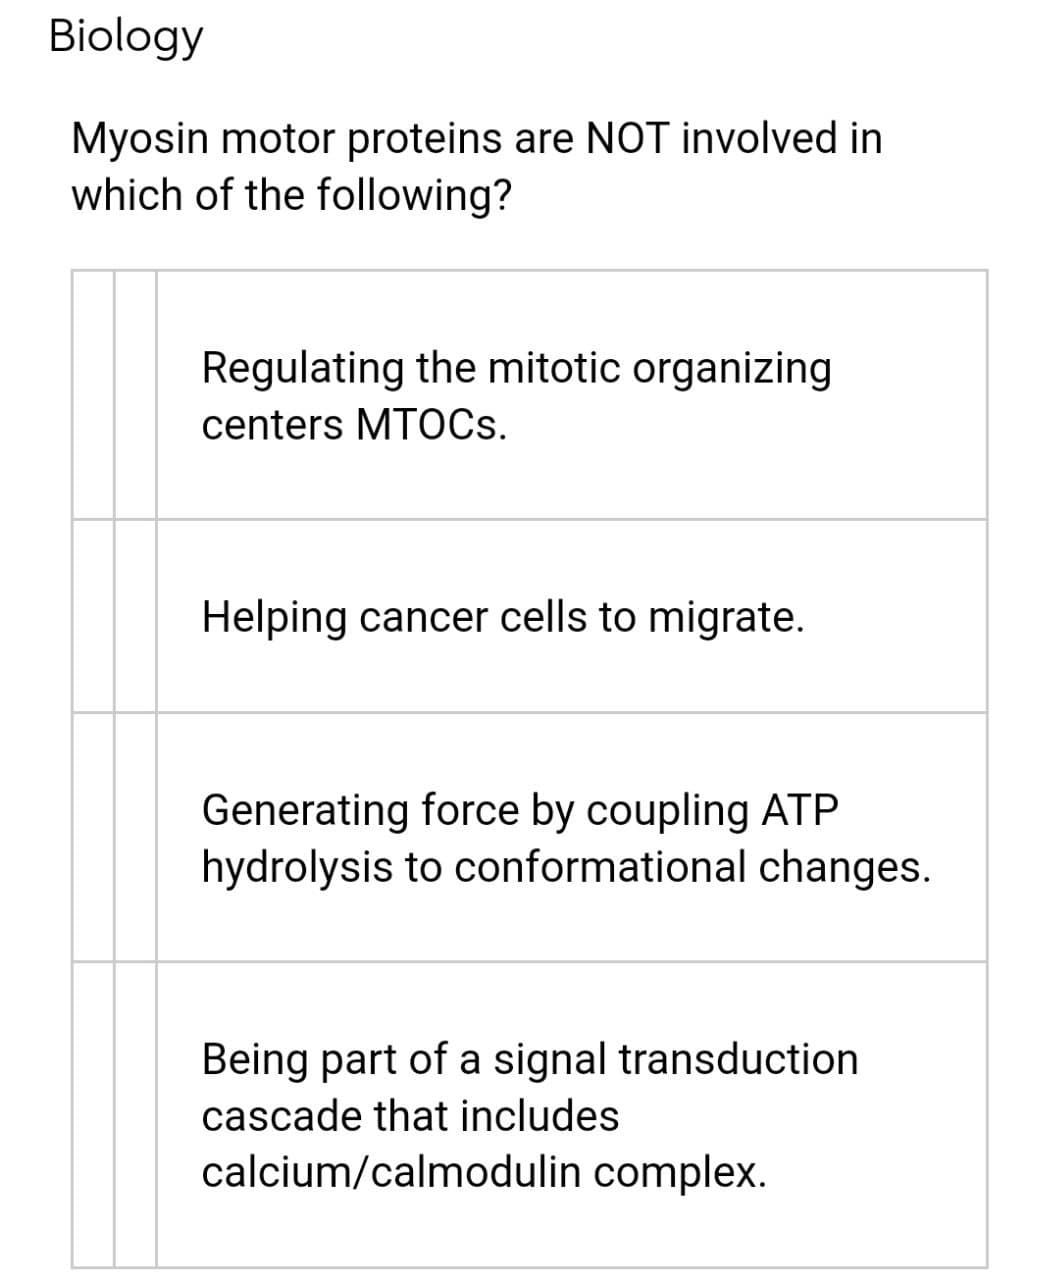 Biology
Myosin motor proteins are NOT involved in
which of the following?
Regulating the mitotic organizing
centers MTOCS.
Helping cancer cells to migrate.
Generating force by coupling ATP
hydrolysis to conformational changes.
Being part of a signal transduction
cascade that includes
calcium/calmodulin complex.
